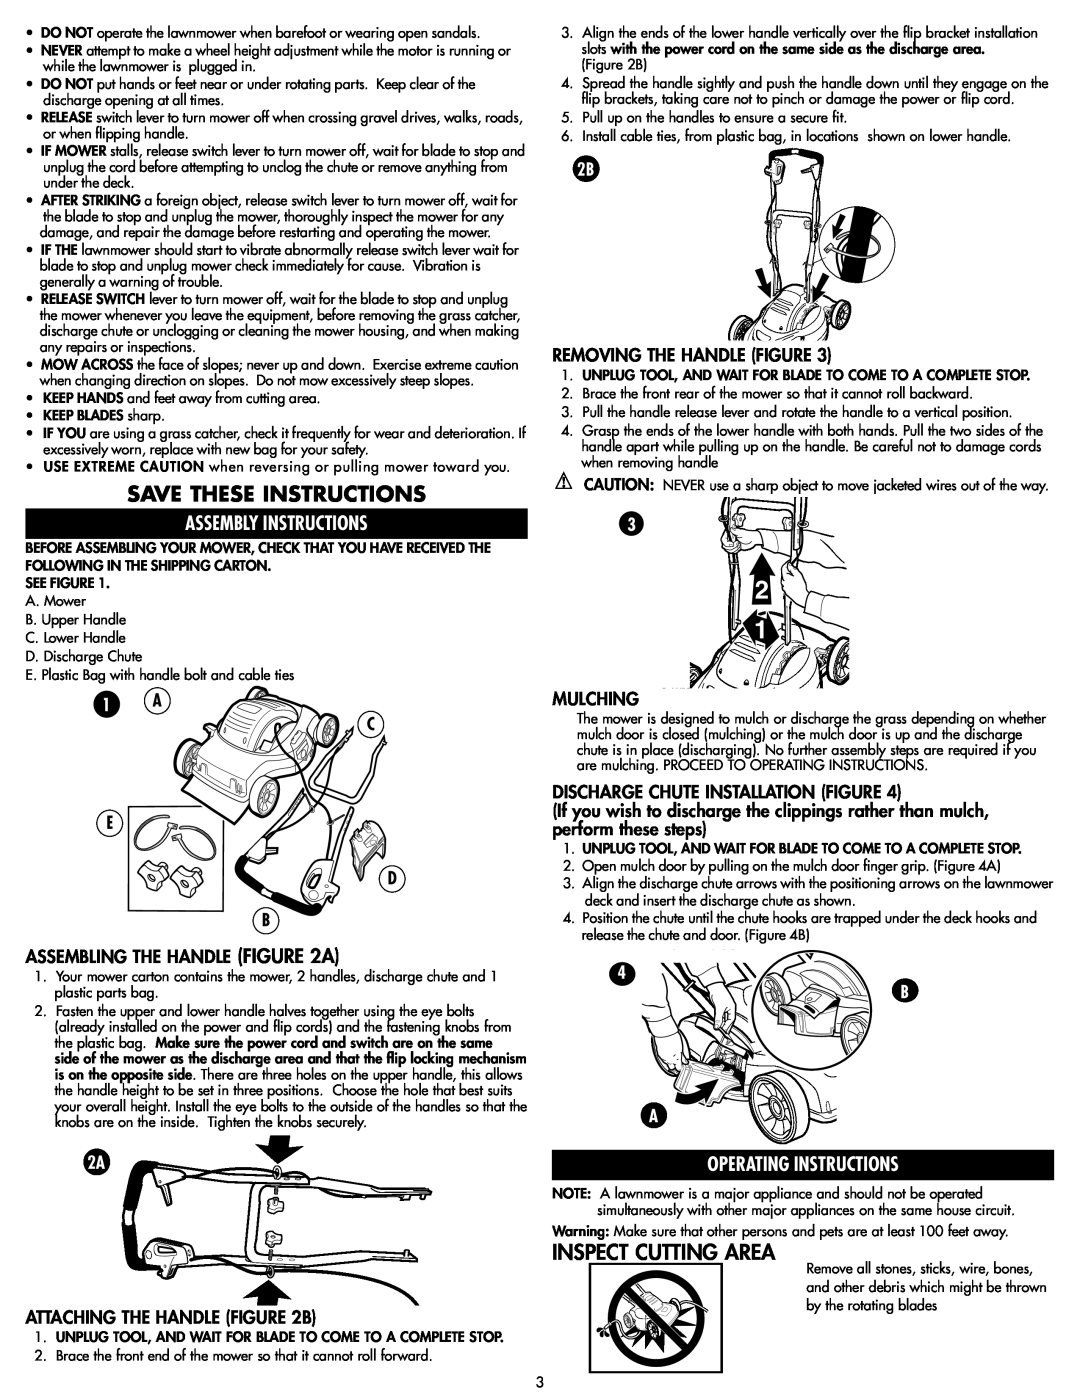 COBY electronic MM675 Save These Instructions, Assembly Instructions, Operating Instructions, C E D B, Mulching 